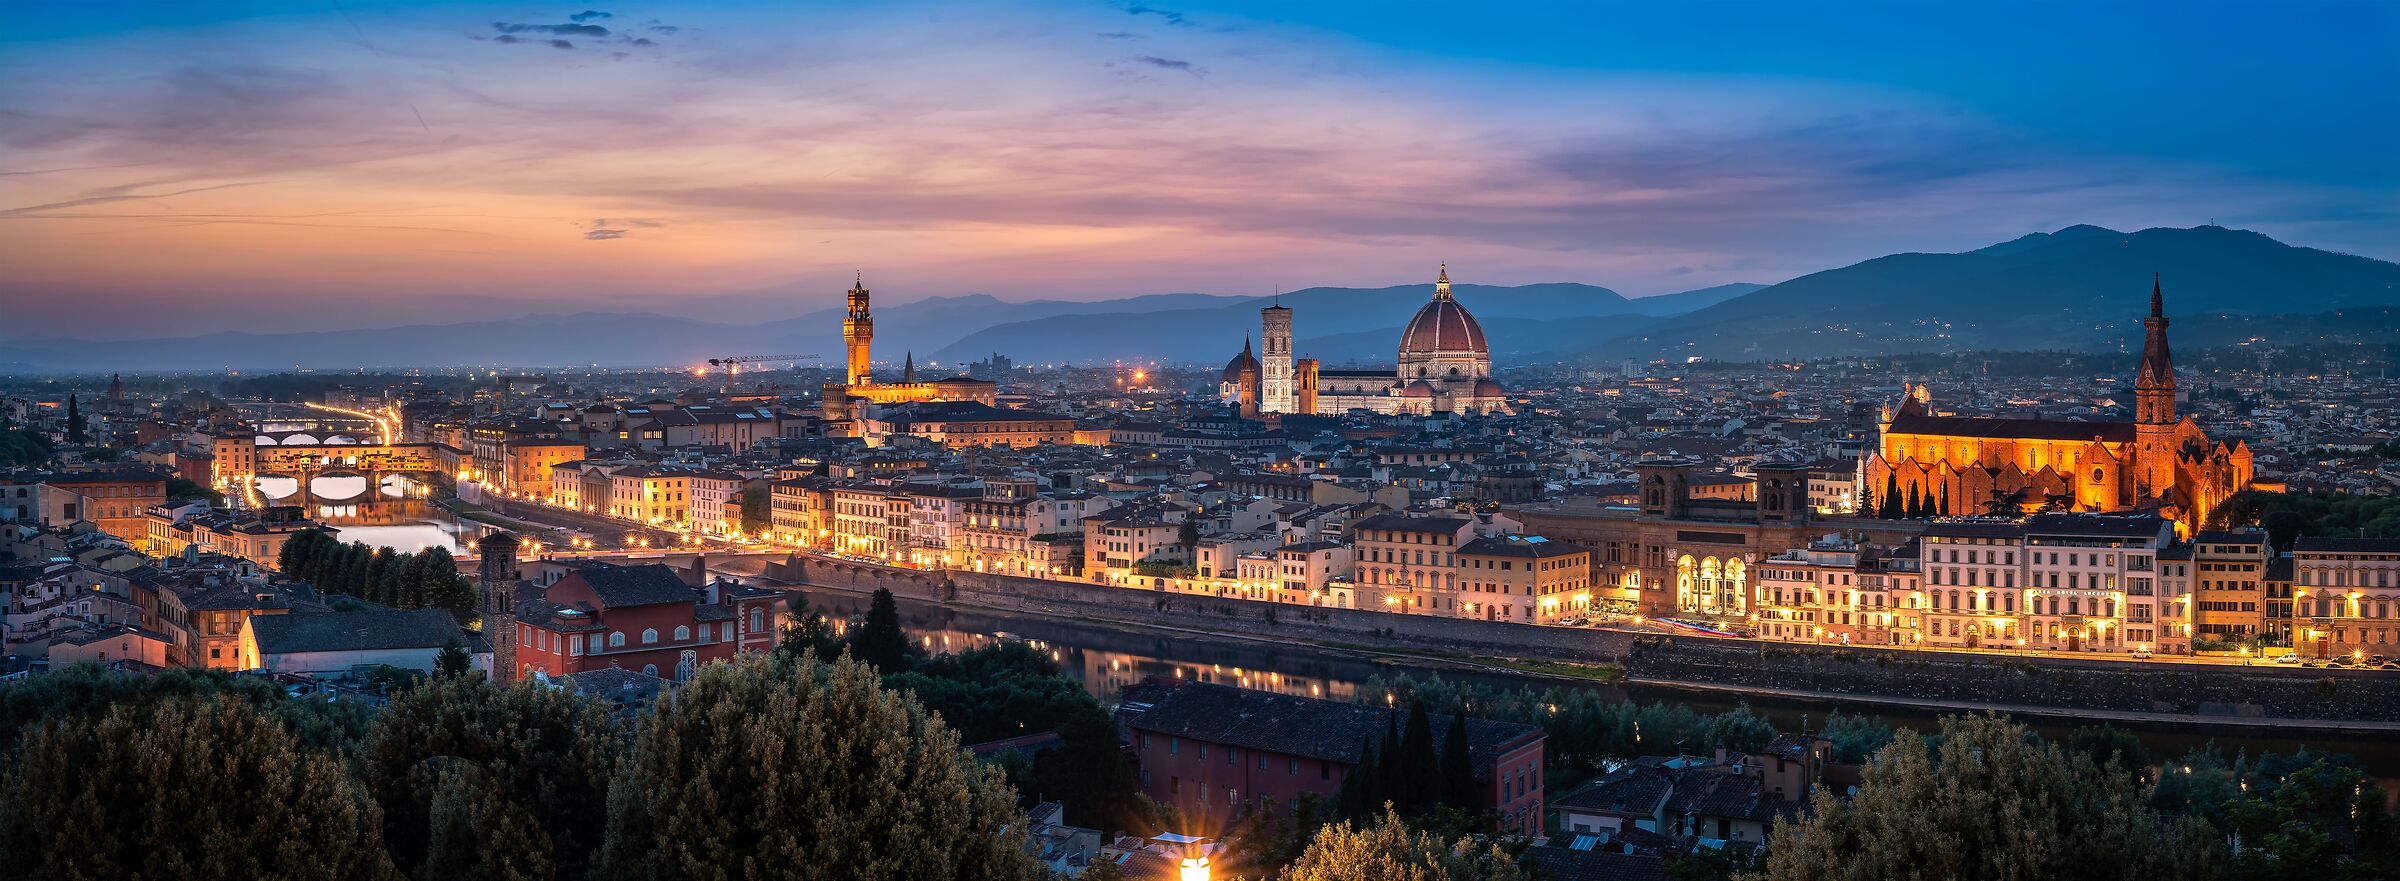 Florence - Piazzale Michelangelo ...